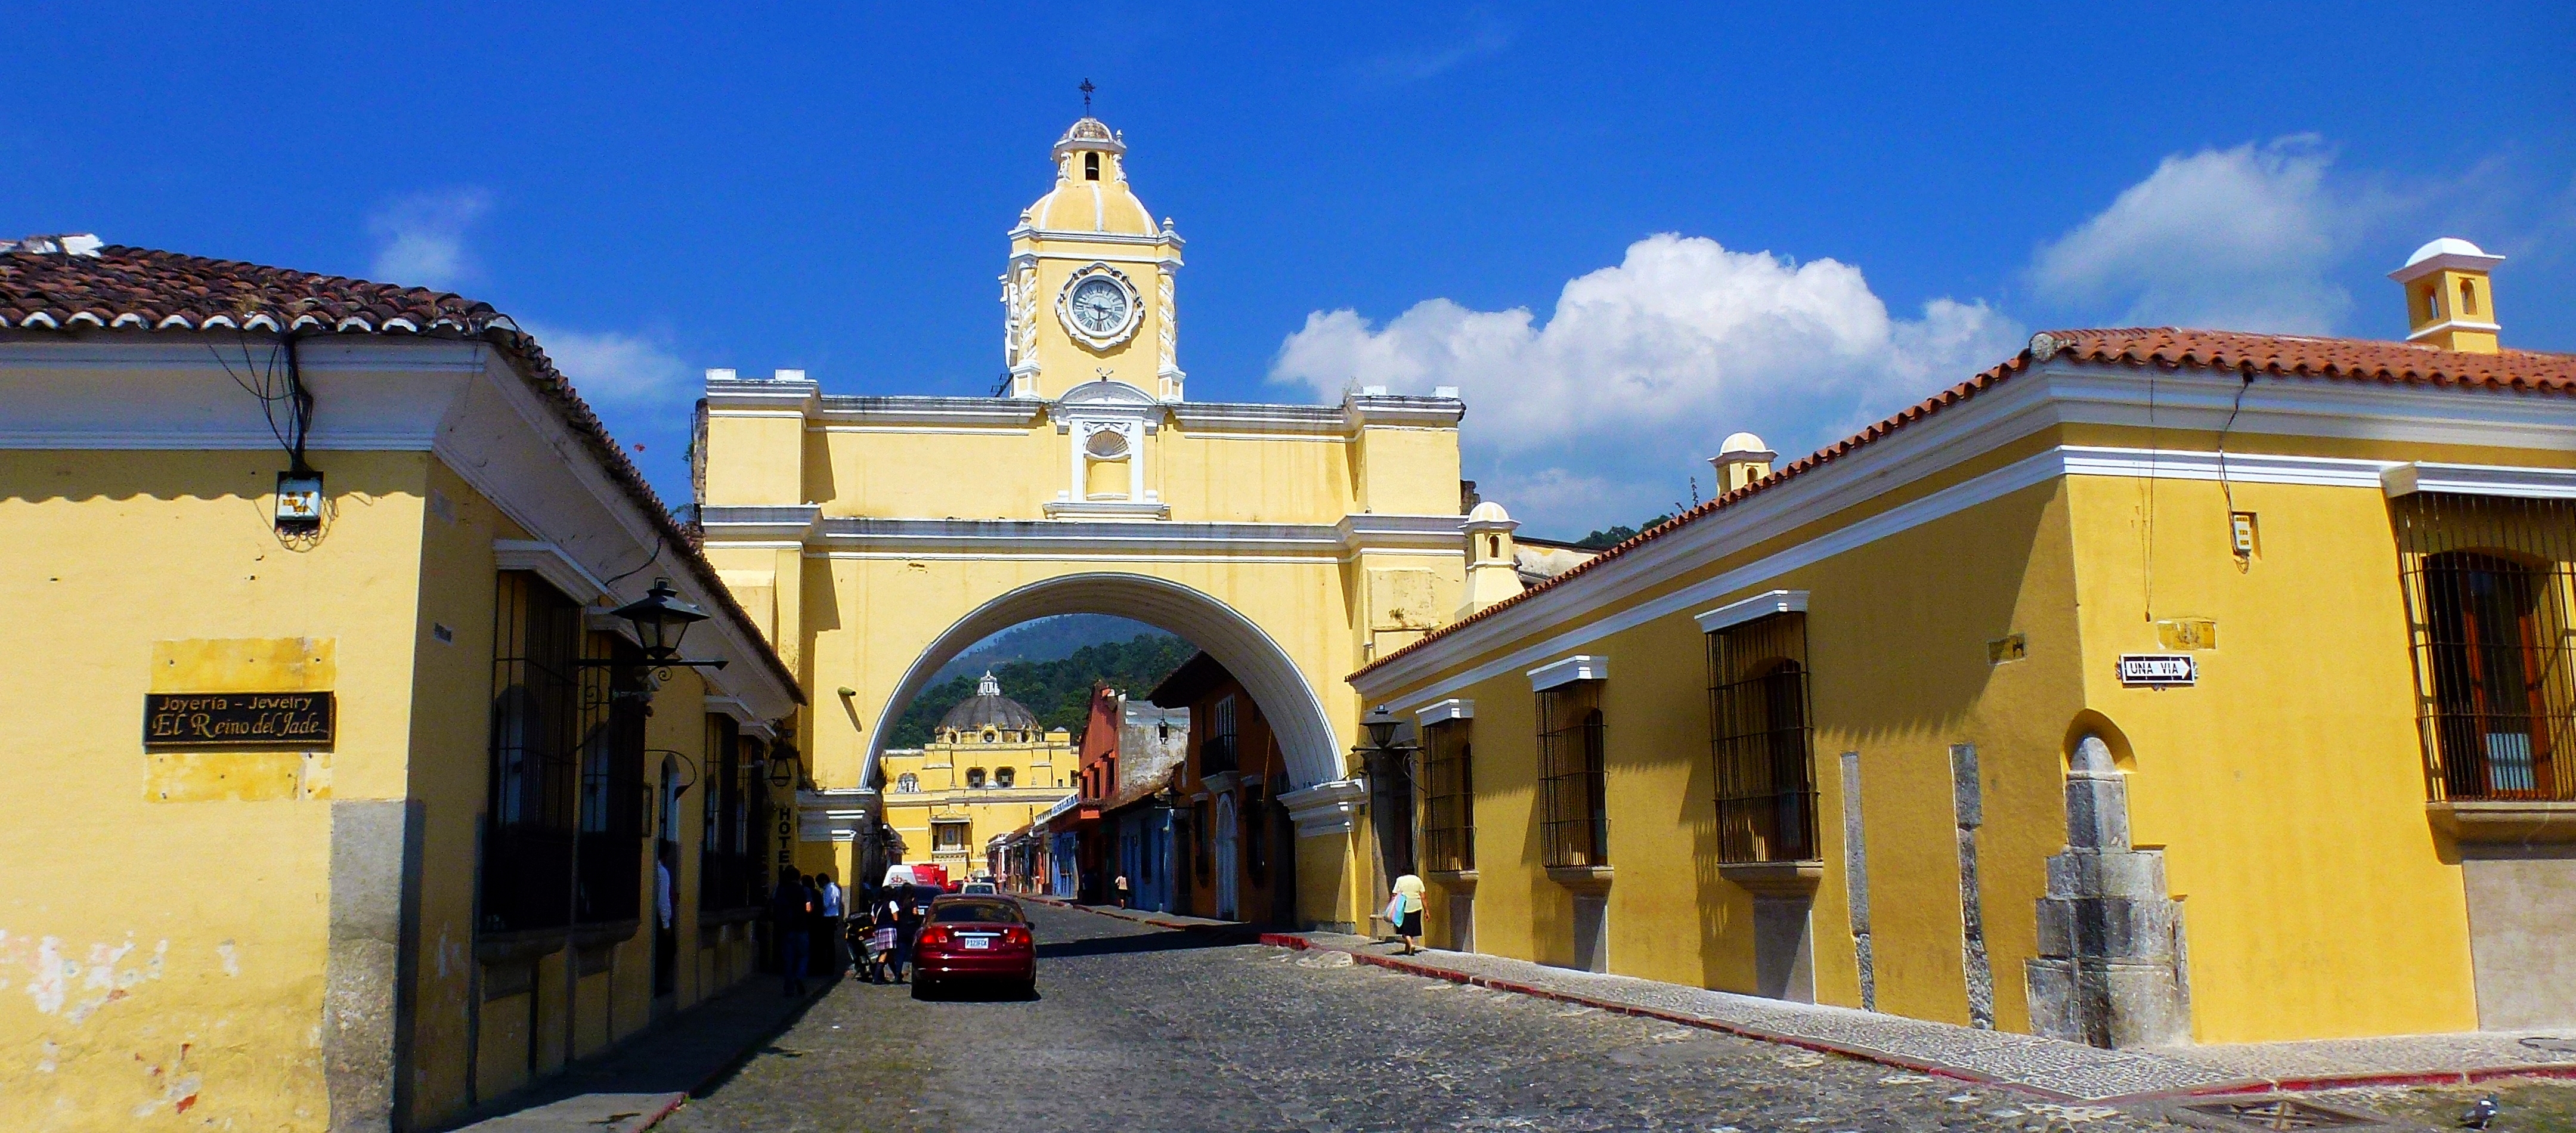 How to Spend A Perfect Day in Antigua, Guatemala